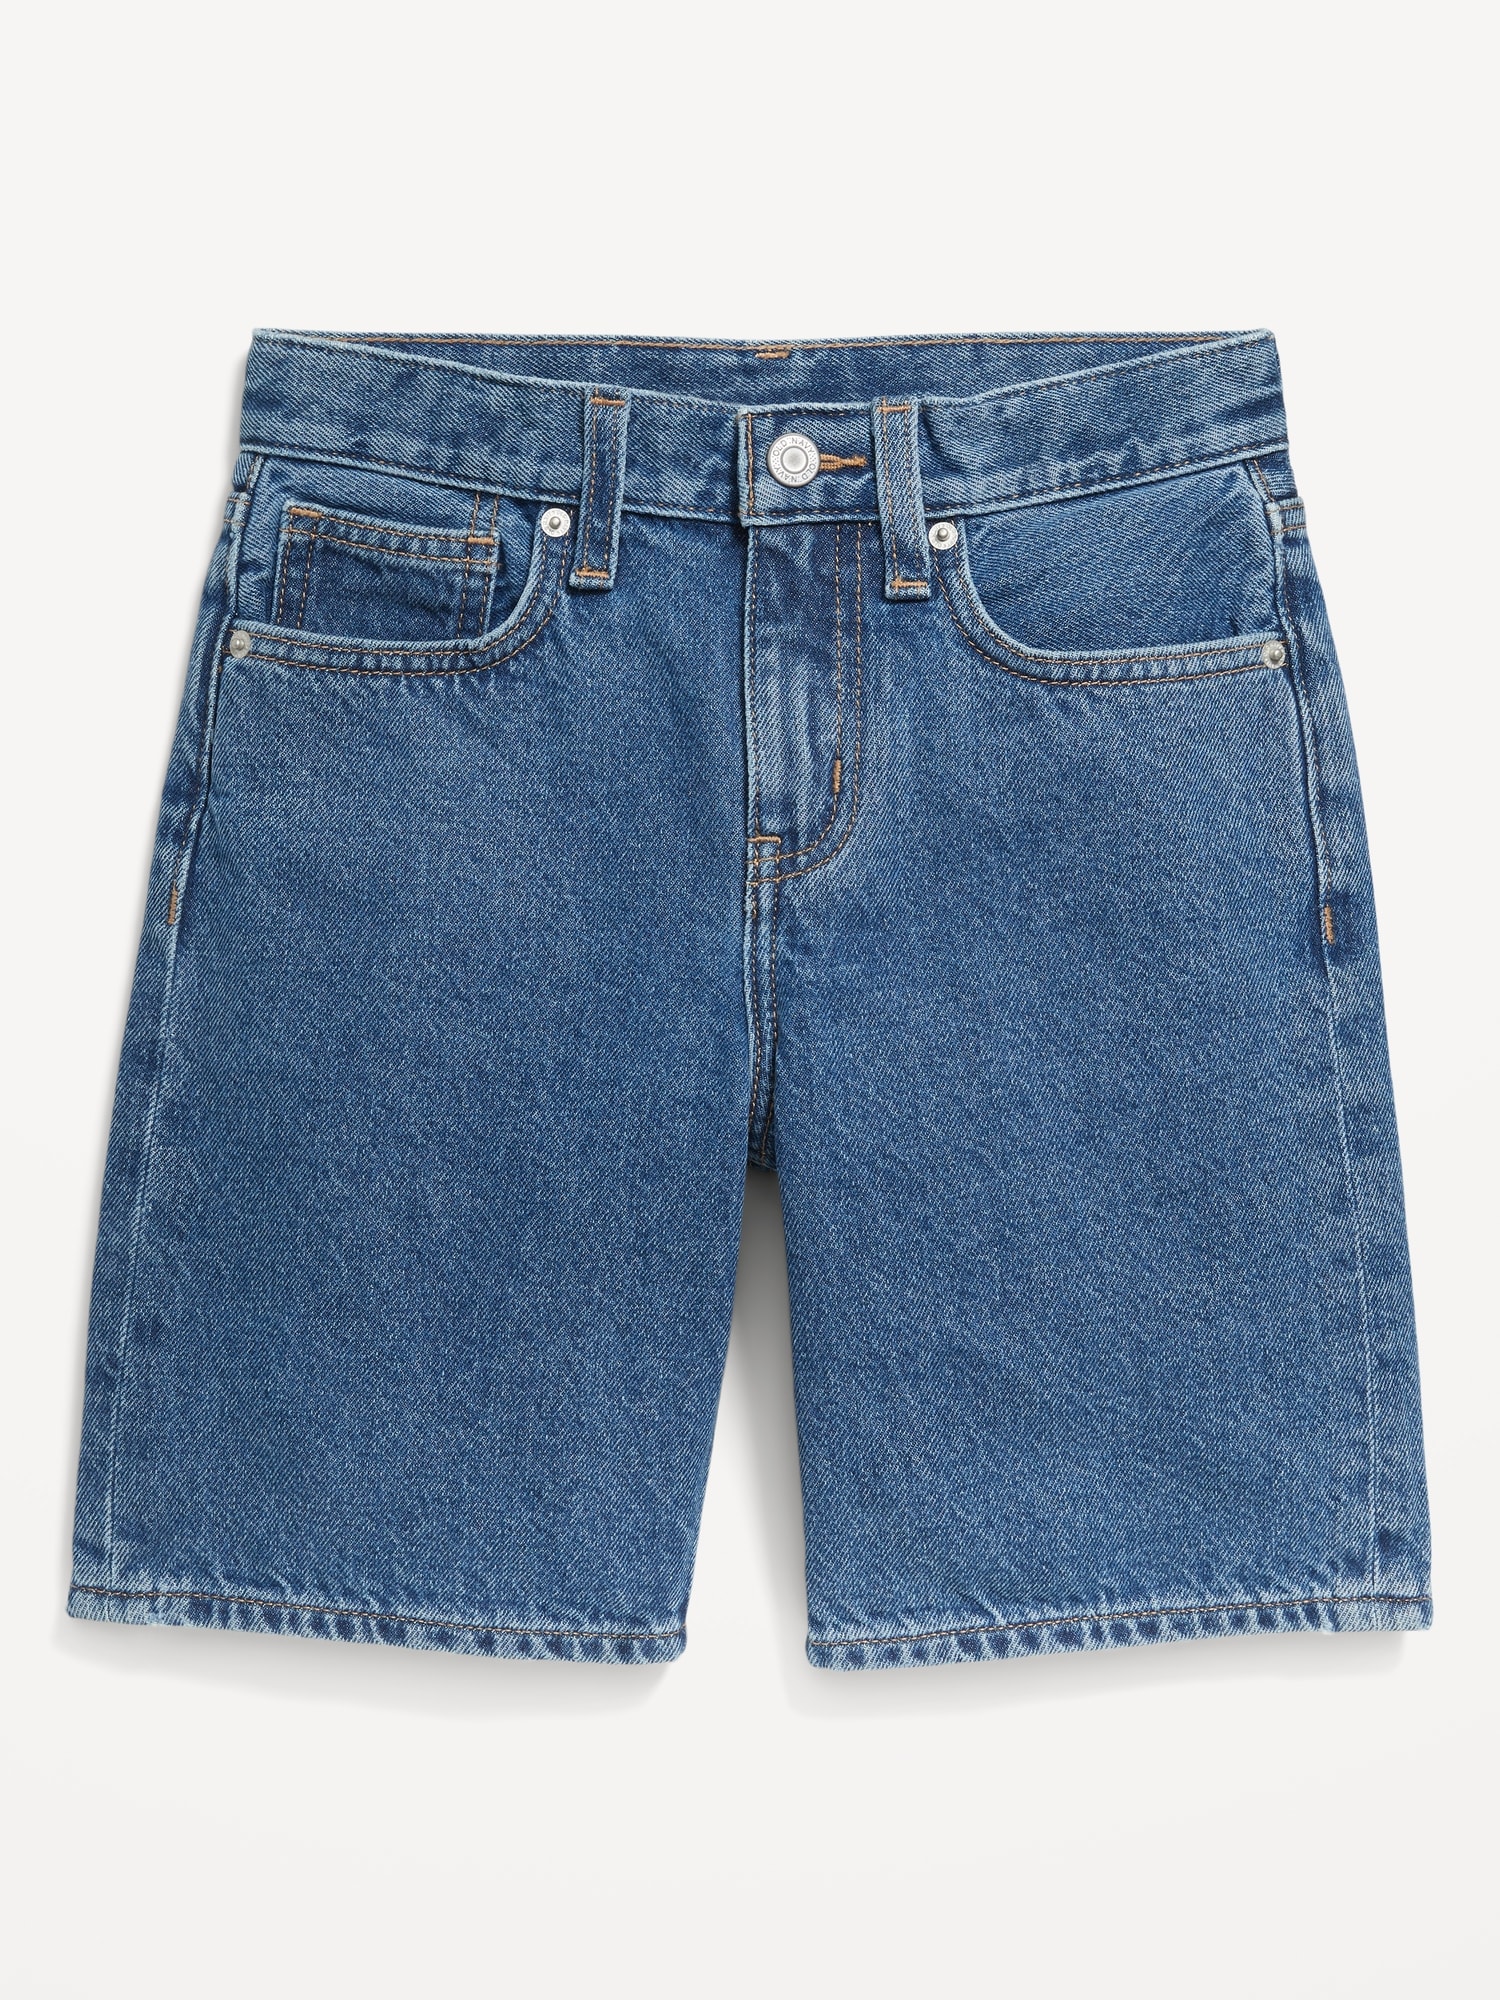 Knee Length Baggy Non-Stretch Jean Shorts for Boys